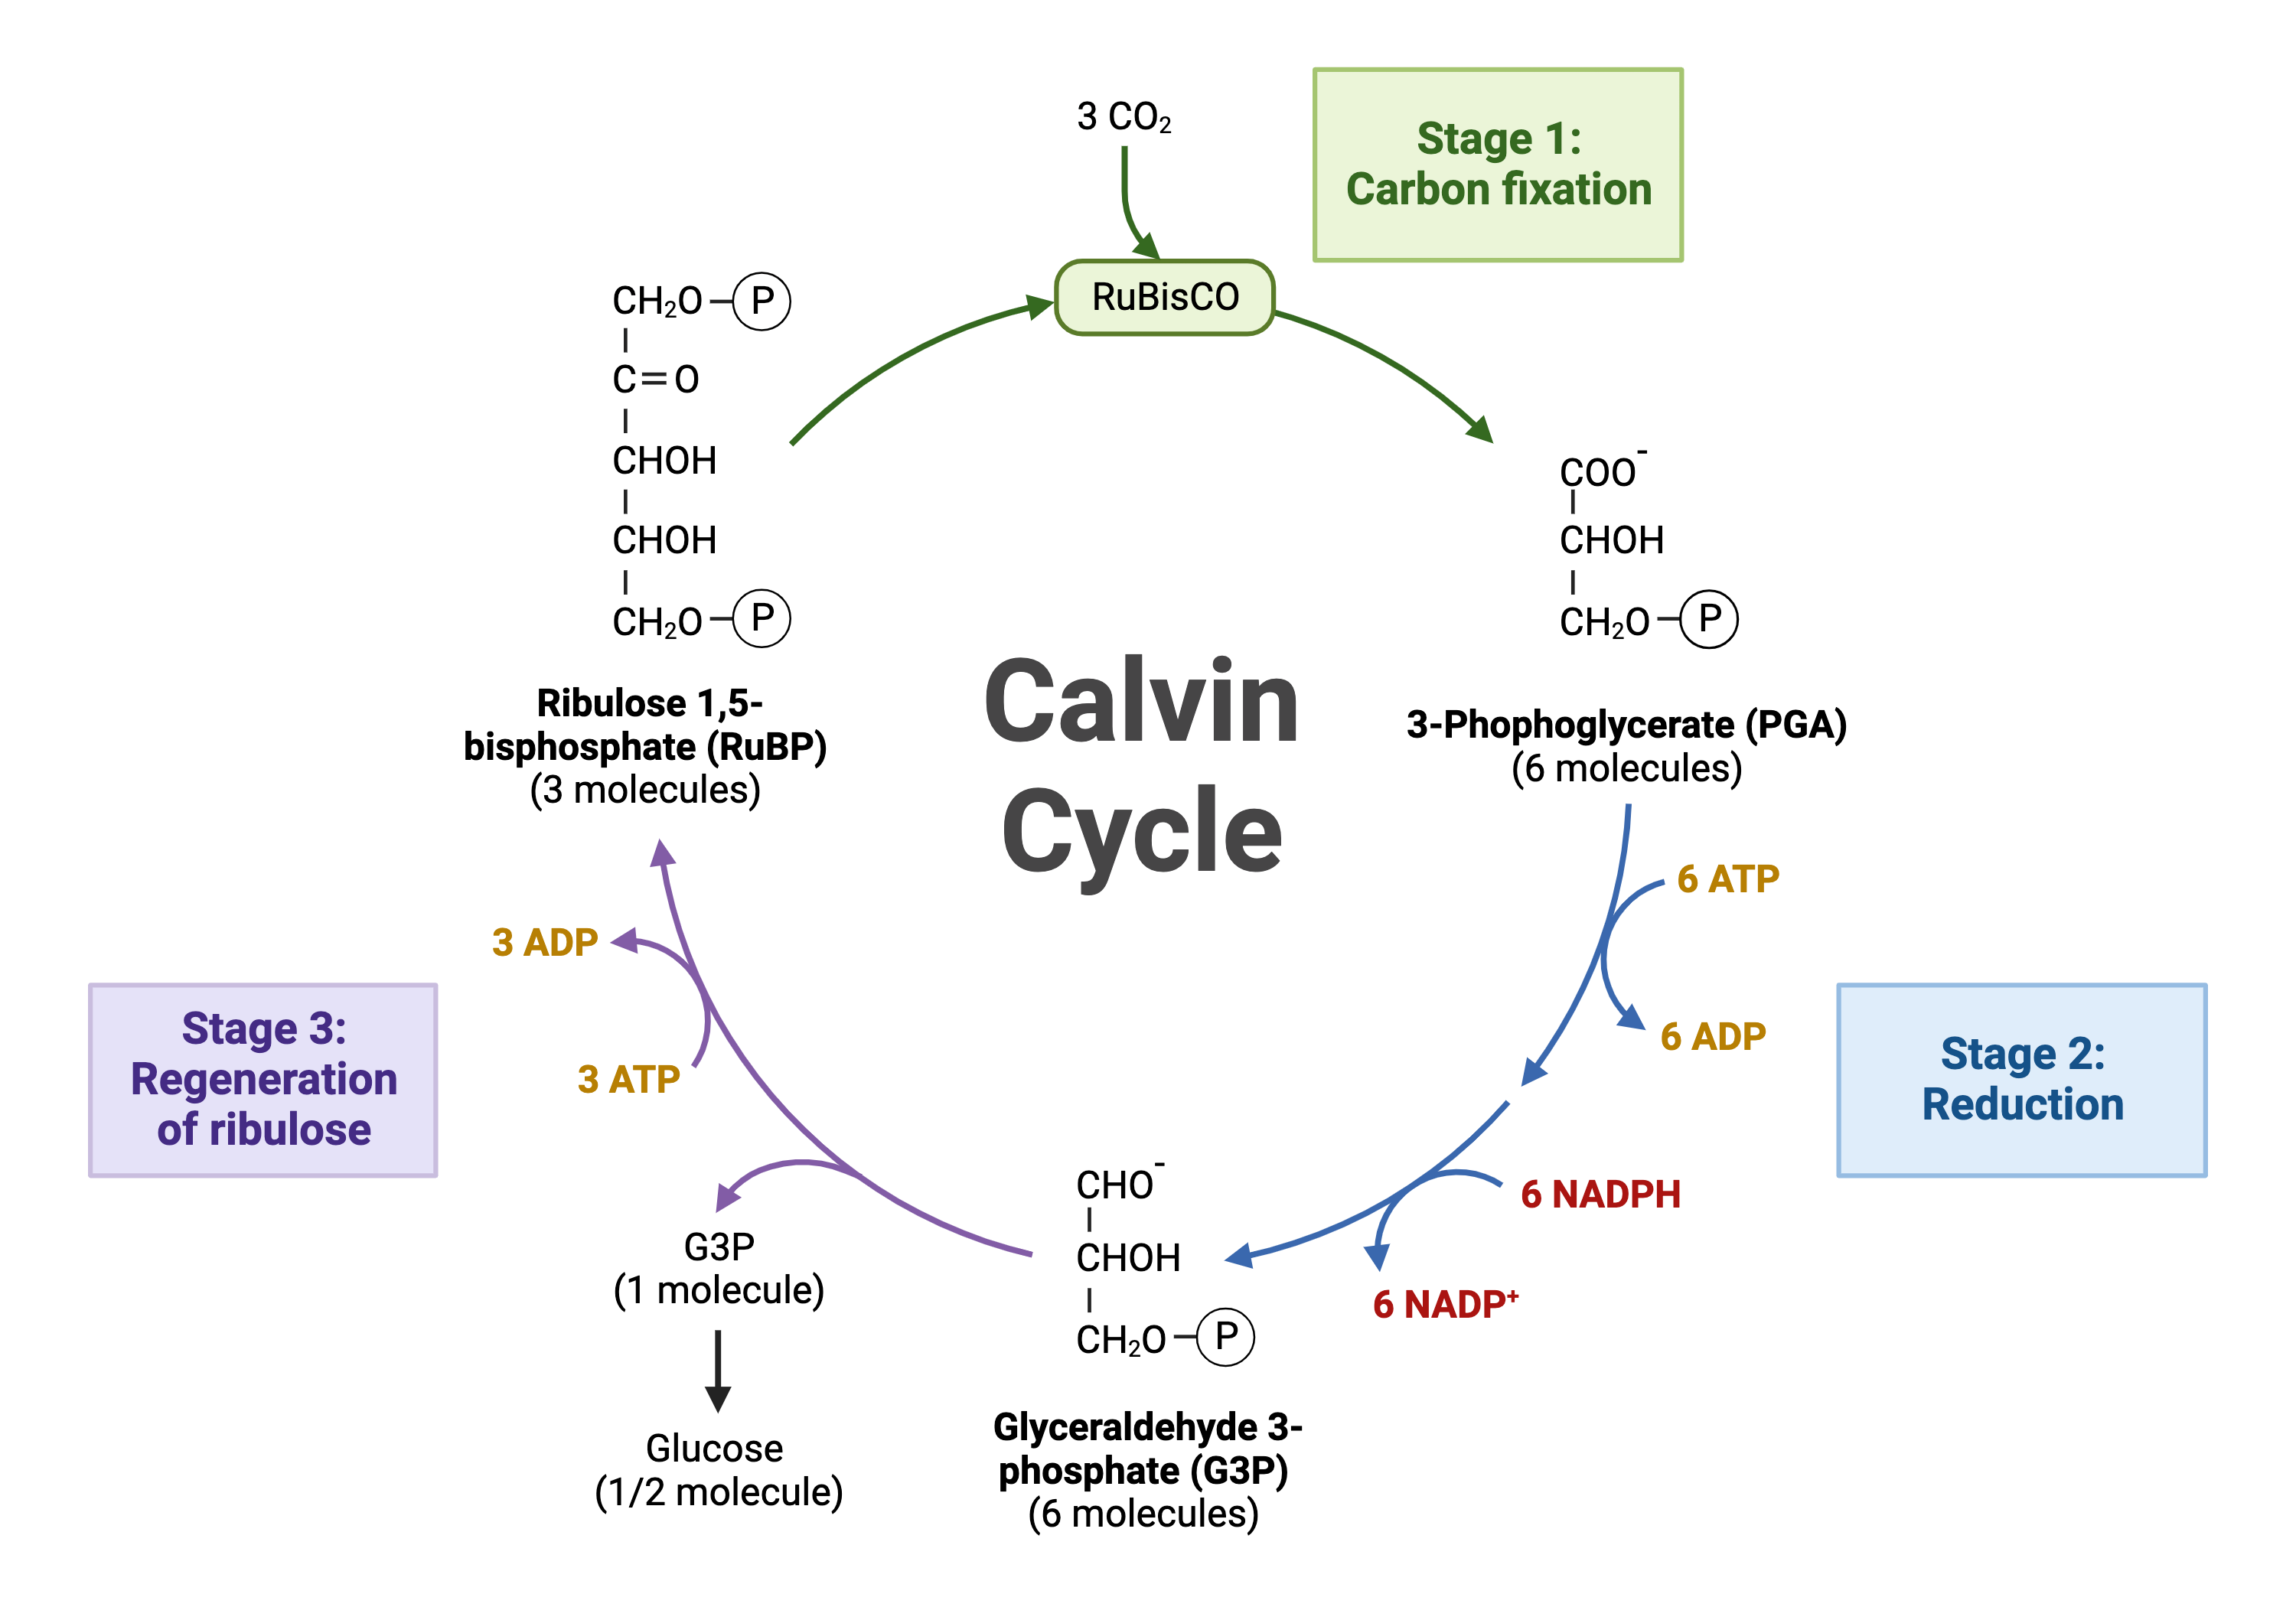 This illustration shows a circular cycle with three stages. Three molecules of carbon dioxide enter the cycle. In the first stage, the enzyme RuBisCO incorporates the carbon dioxide into an organic molecule. Six ATP molecules are converted into six ADP molecules. In the second stage, the organic molecule is reduced. Six NADPH molecules are converted into six NADP+ ions and one hydrogen ion. Sugar is produced. In stage three, RuBP is regenerated, and three ATP molecules are converted into three ADP molecules. RuBP then starts the cycle again.